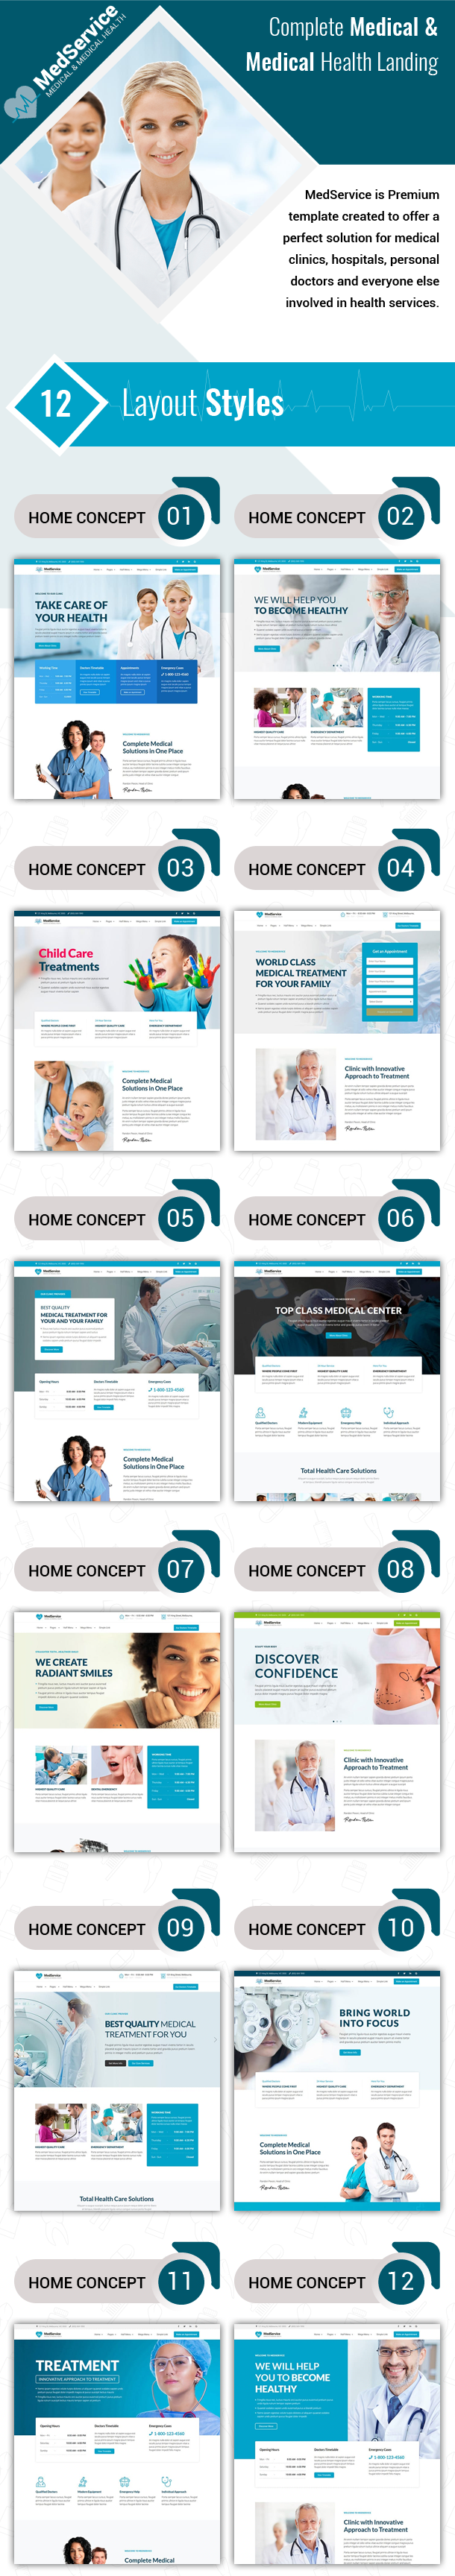 Medical Clinic Hospital WordPress Theme for Appointment calendar booking & scheduling - MedService - 1